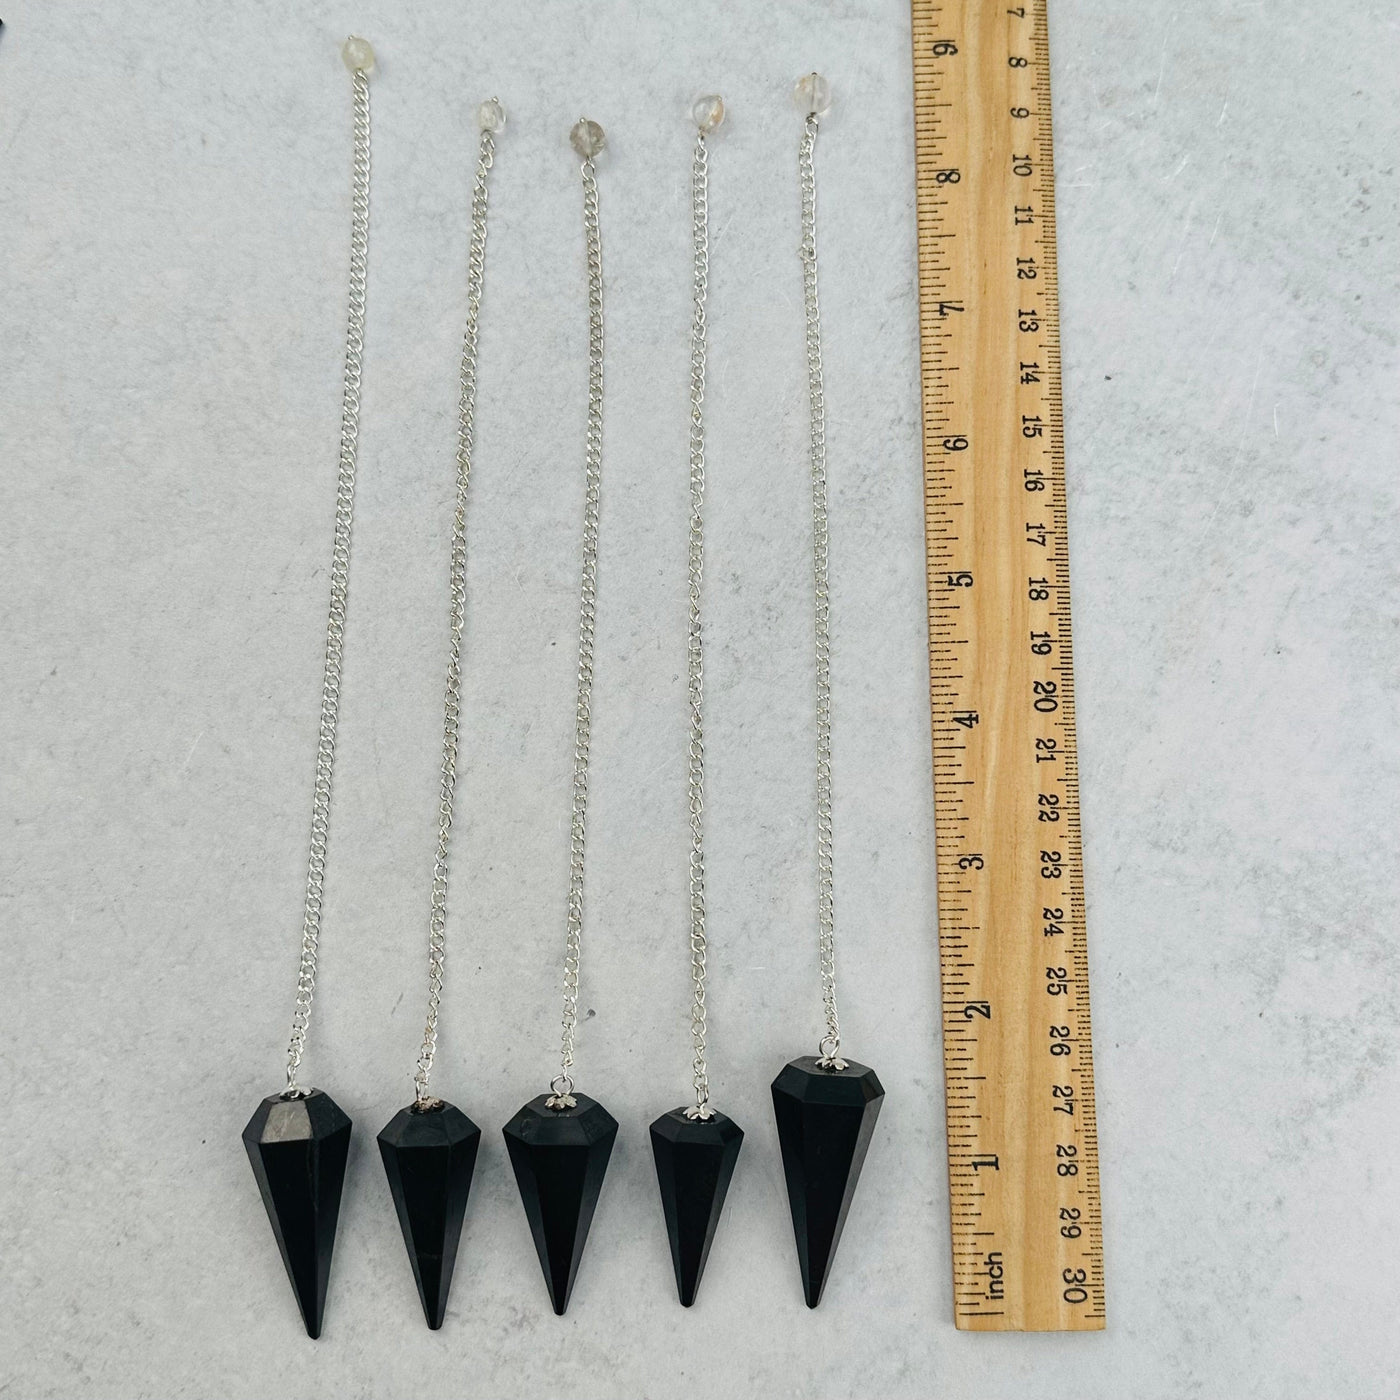 Shungite Pendulums next to a ruler for size reference 